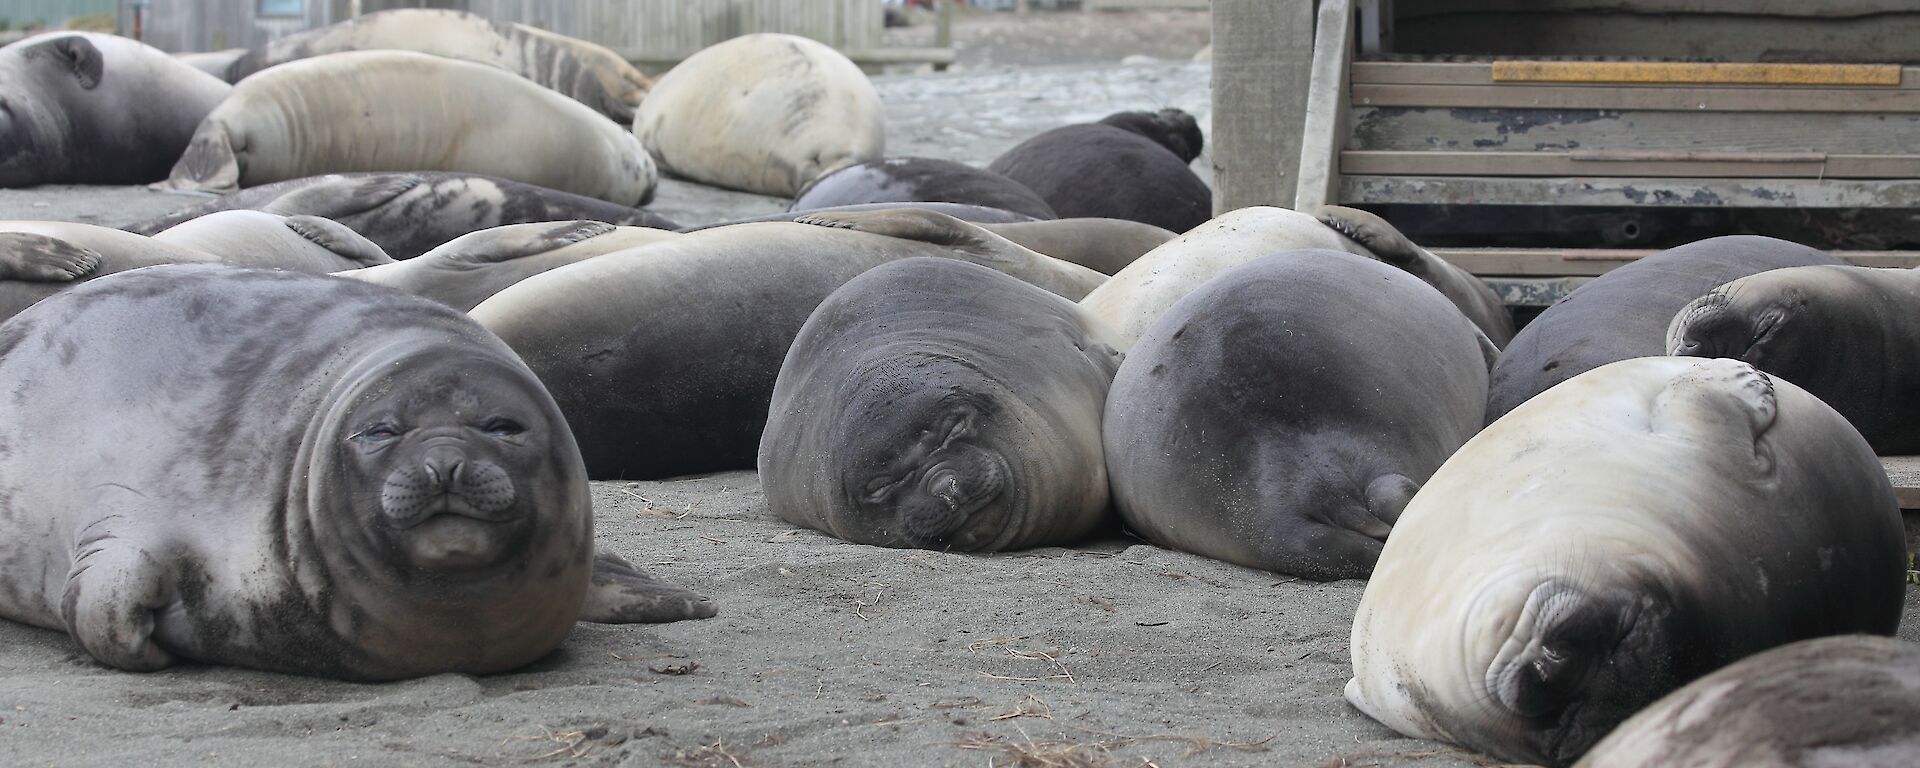 Elephant seals block access to buildings on Macquarie Island.